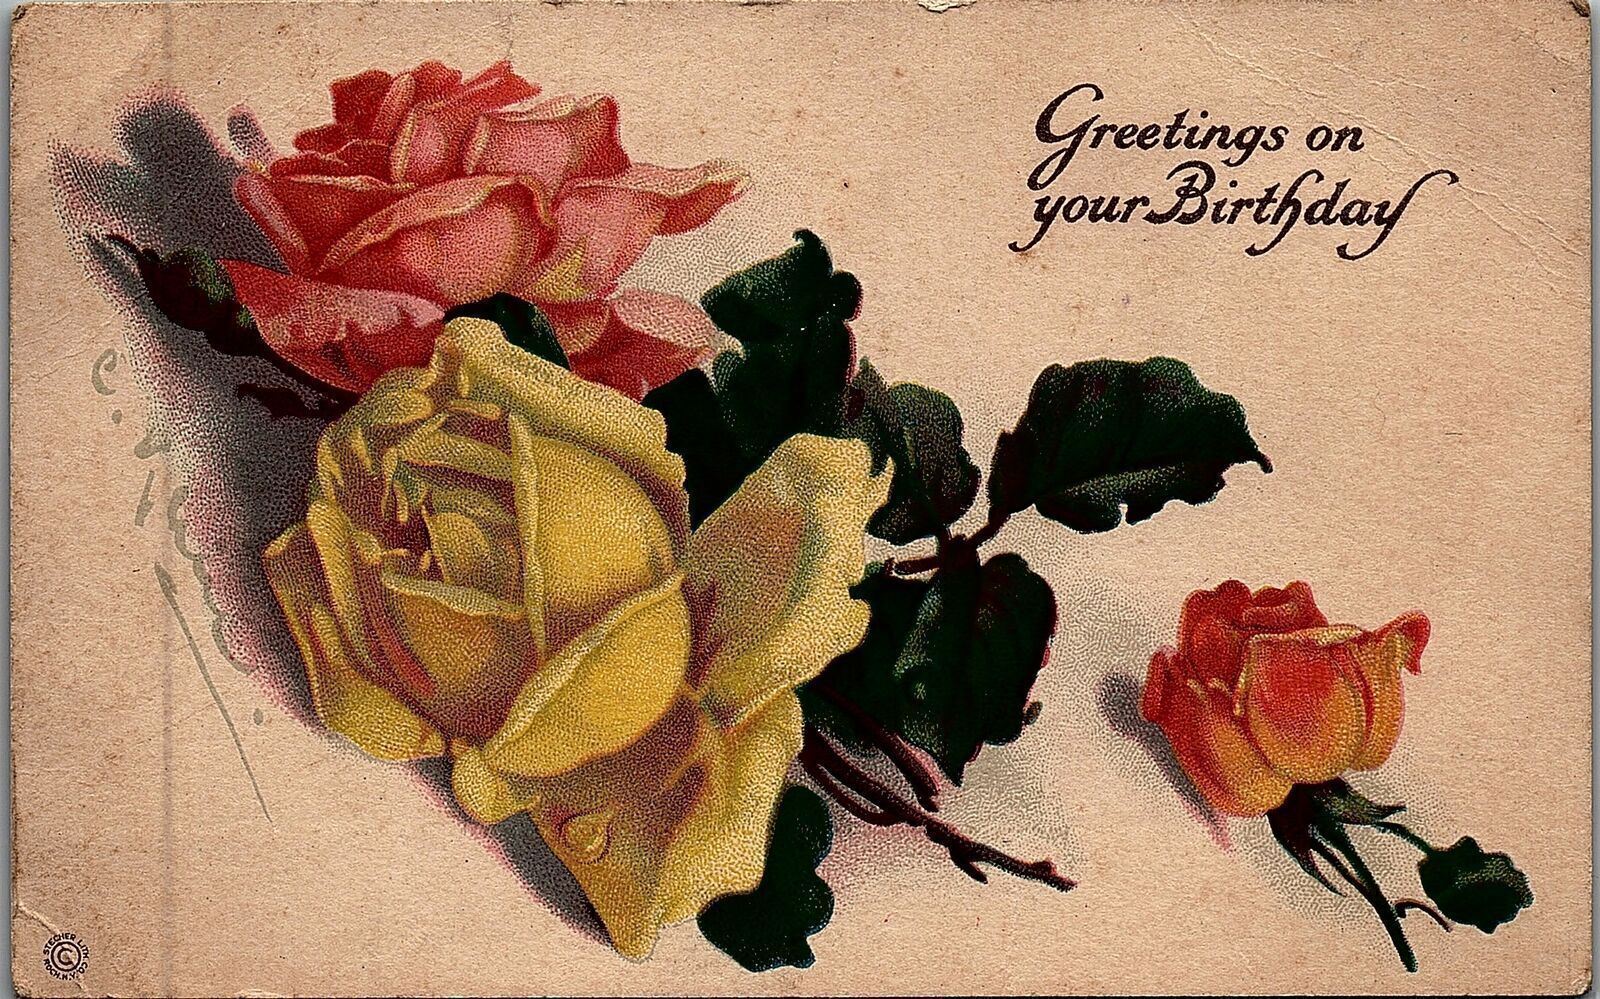 c1910 GREETINGS ON YOUR BIRTHDAY FLORAL UNPOSTED POSTCARD 25-50